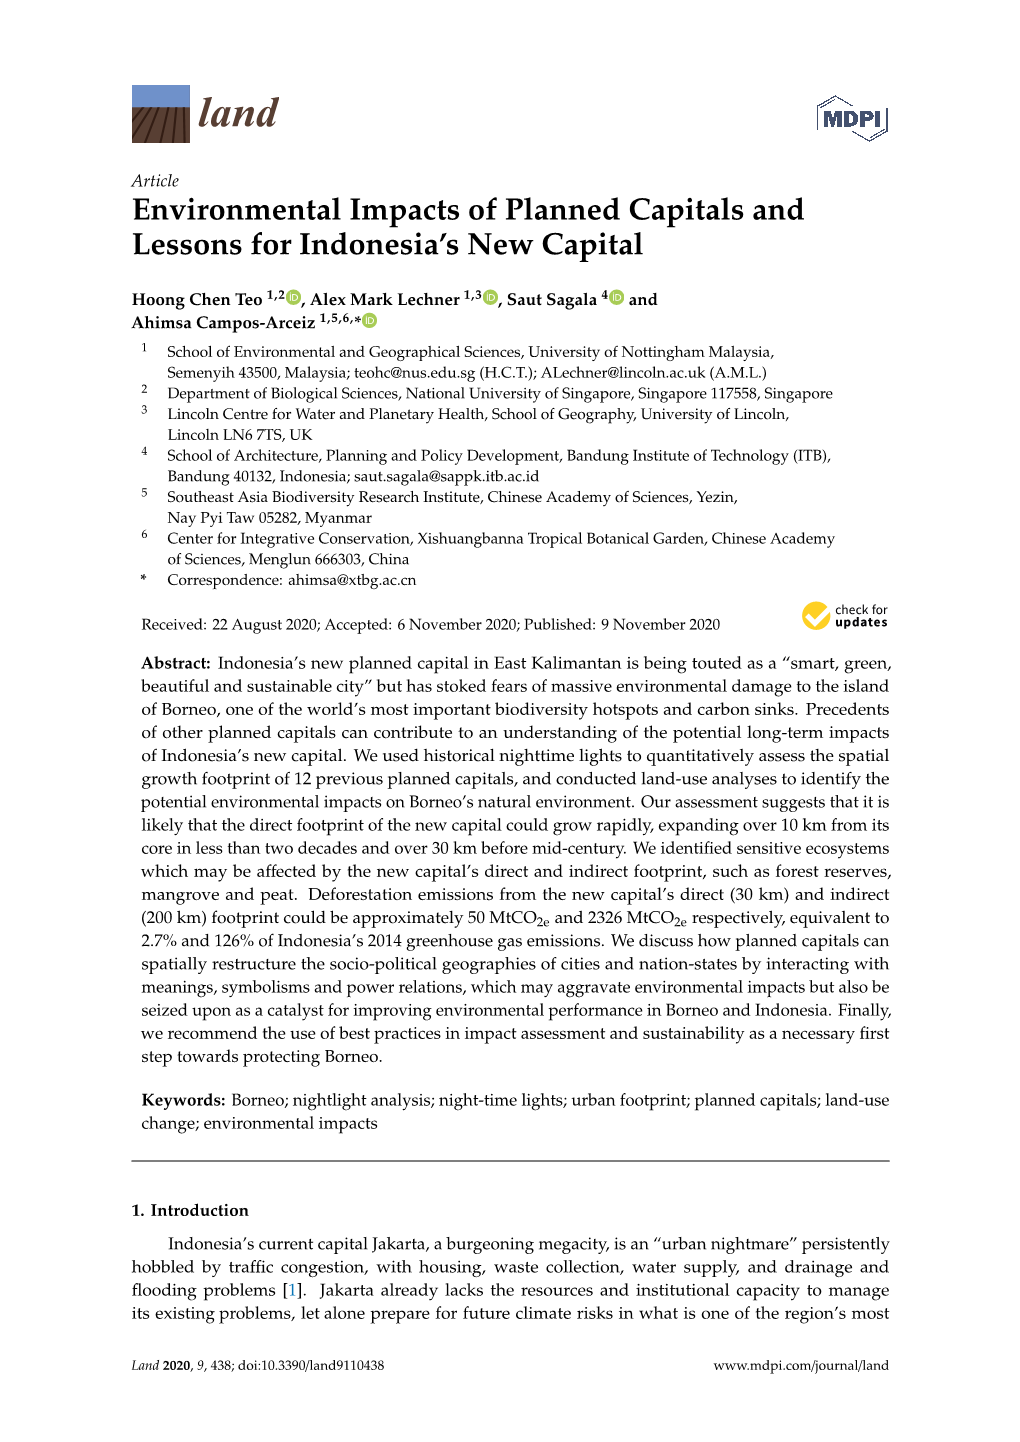 Environmental Impacts of Planned Capitals and Lessons for Indonesia’S New Capital